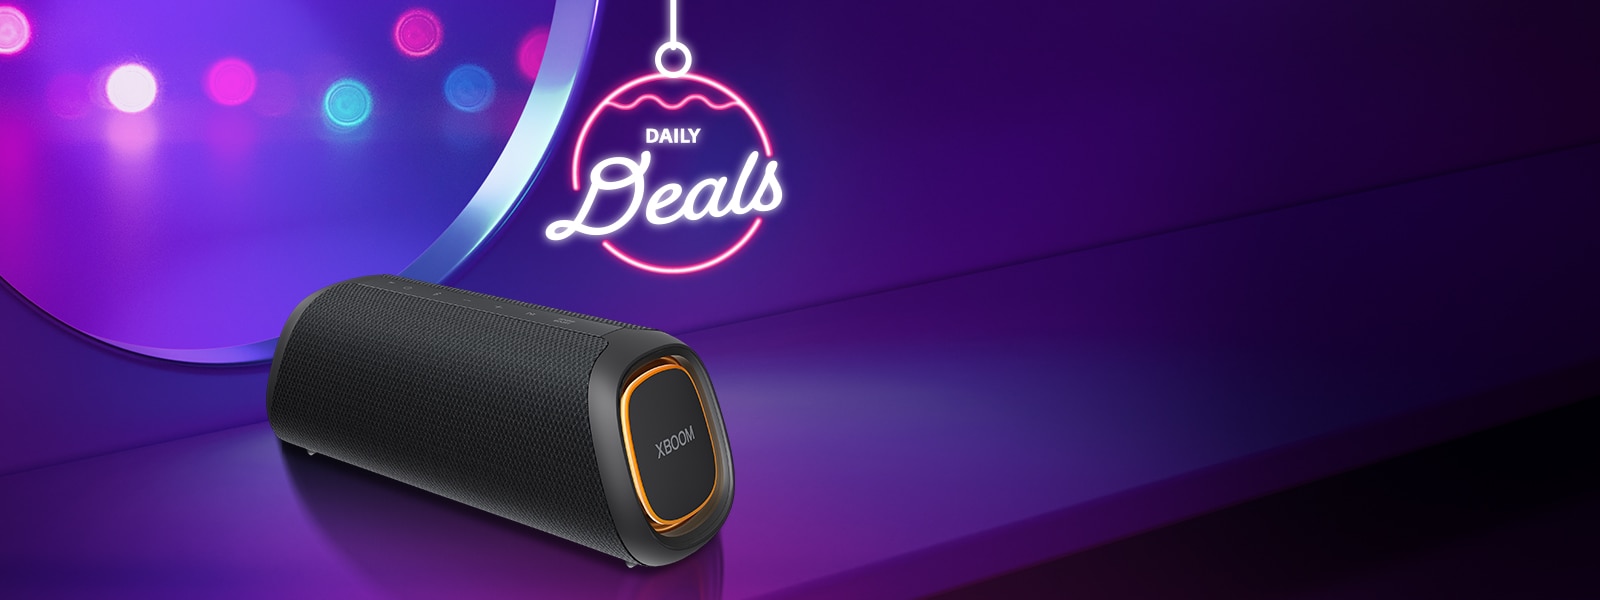 Light up the holiday party with an extra 20% off wireless speakers